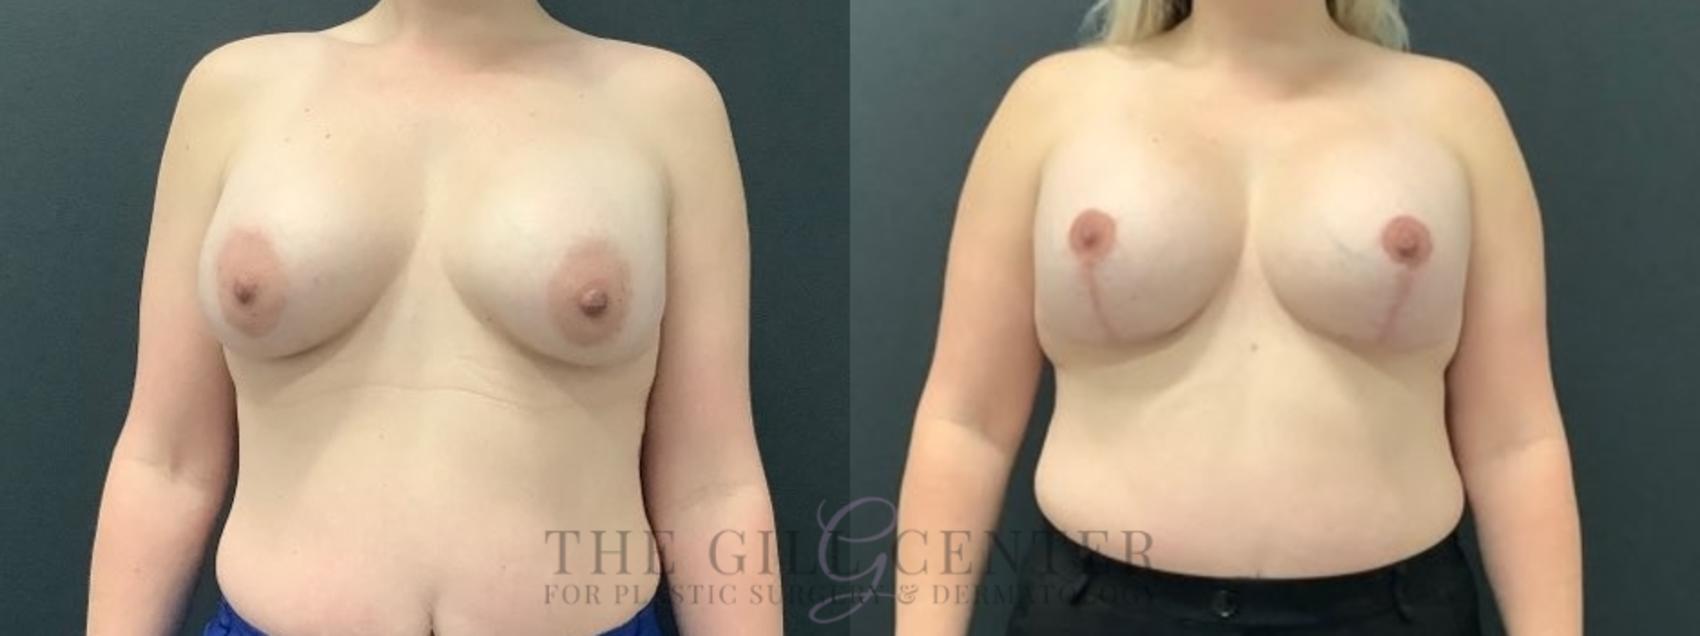 Breast Revisions Case 639 Before & After Front | The Woodlands, TX | The Gill Center for Plastic Surgery and Dermatology